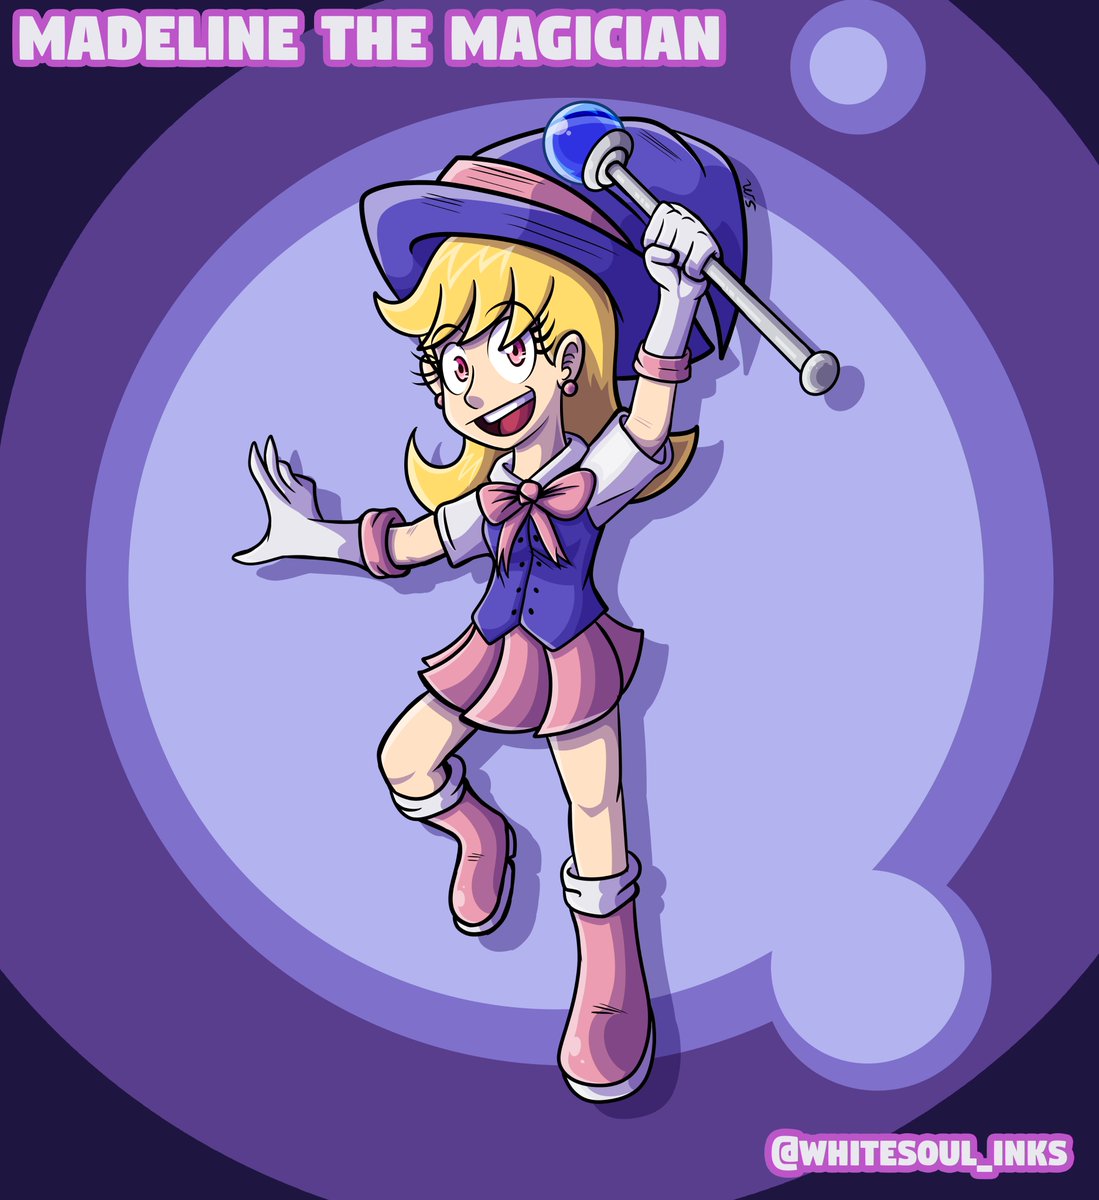 ⭐Madeline the Magician ⭐

A fanart made for @UnknownArtistML for 'Madeline's MAY-gical Medley'
Honestly, I loved doing this drawing of this little magician

🤍 and 🔄 are appreciated 

Follow him, he is an excellent artist!